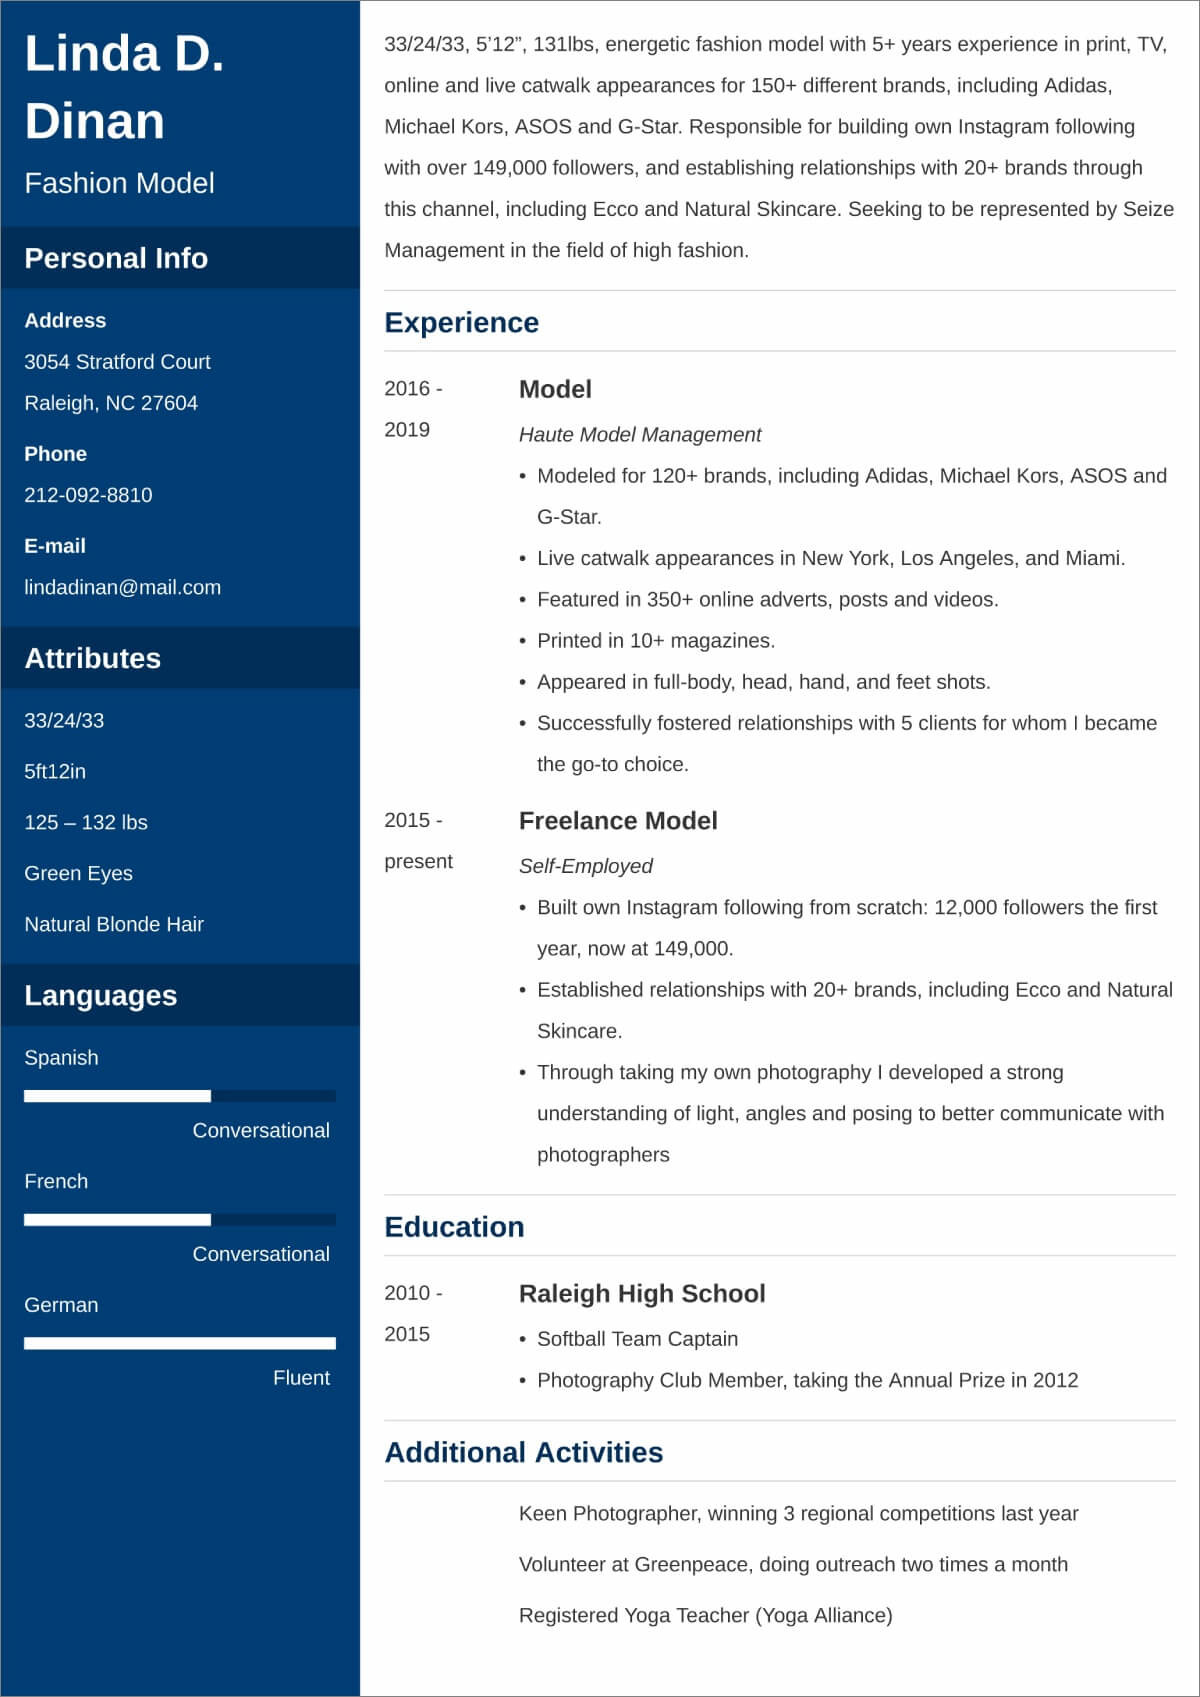 Resume—Examples and 25+ Writing Tips